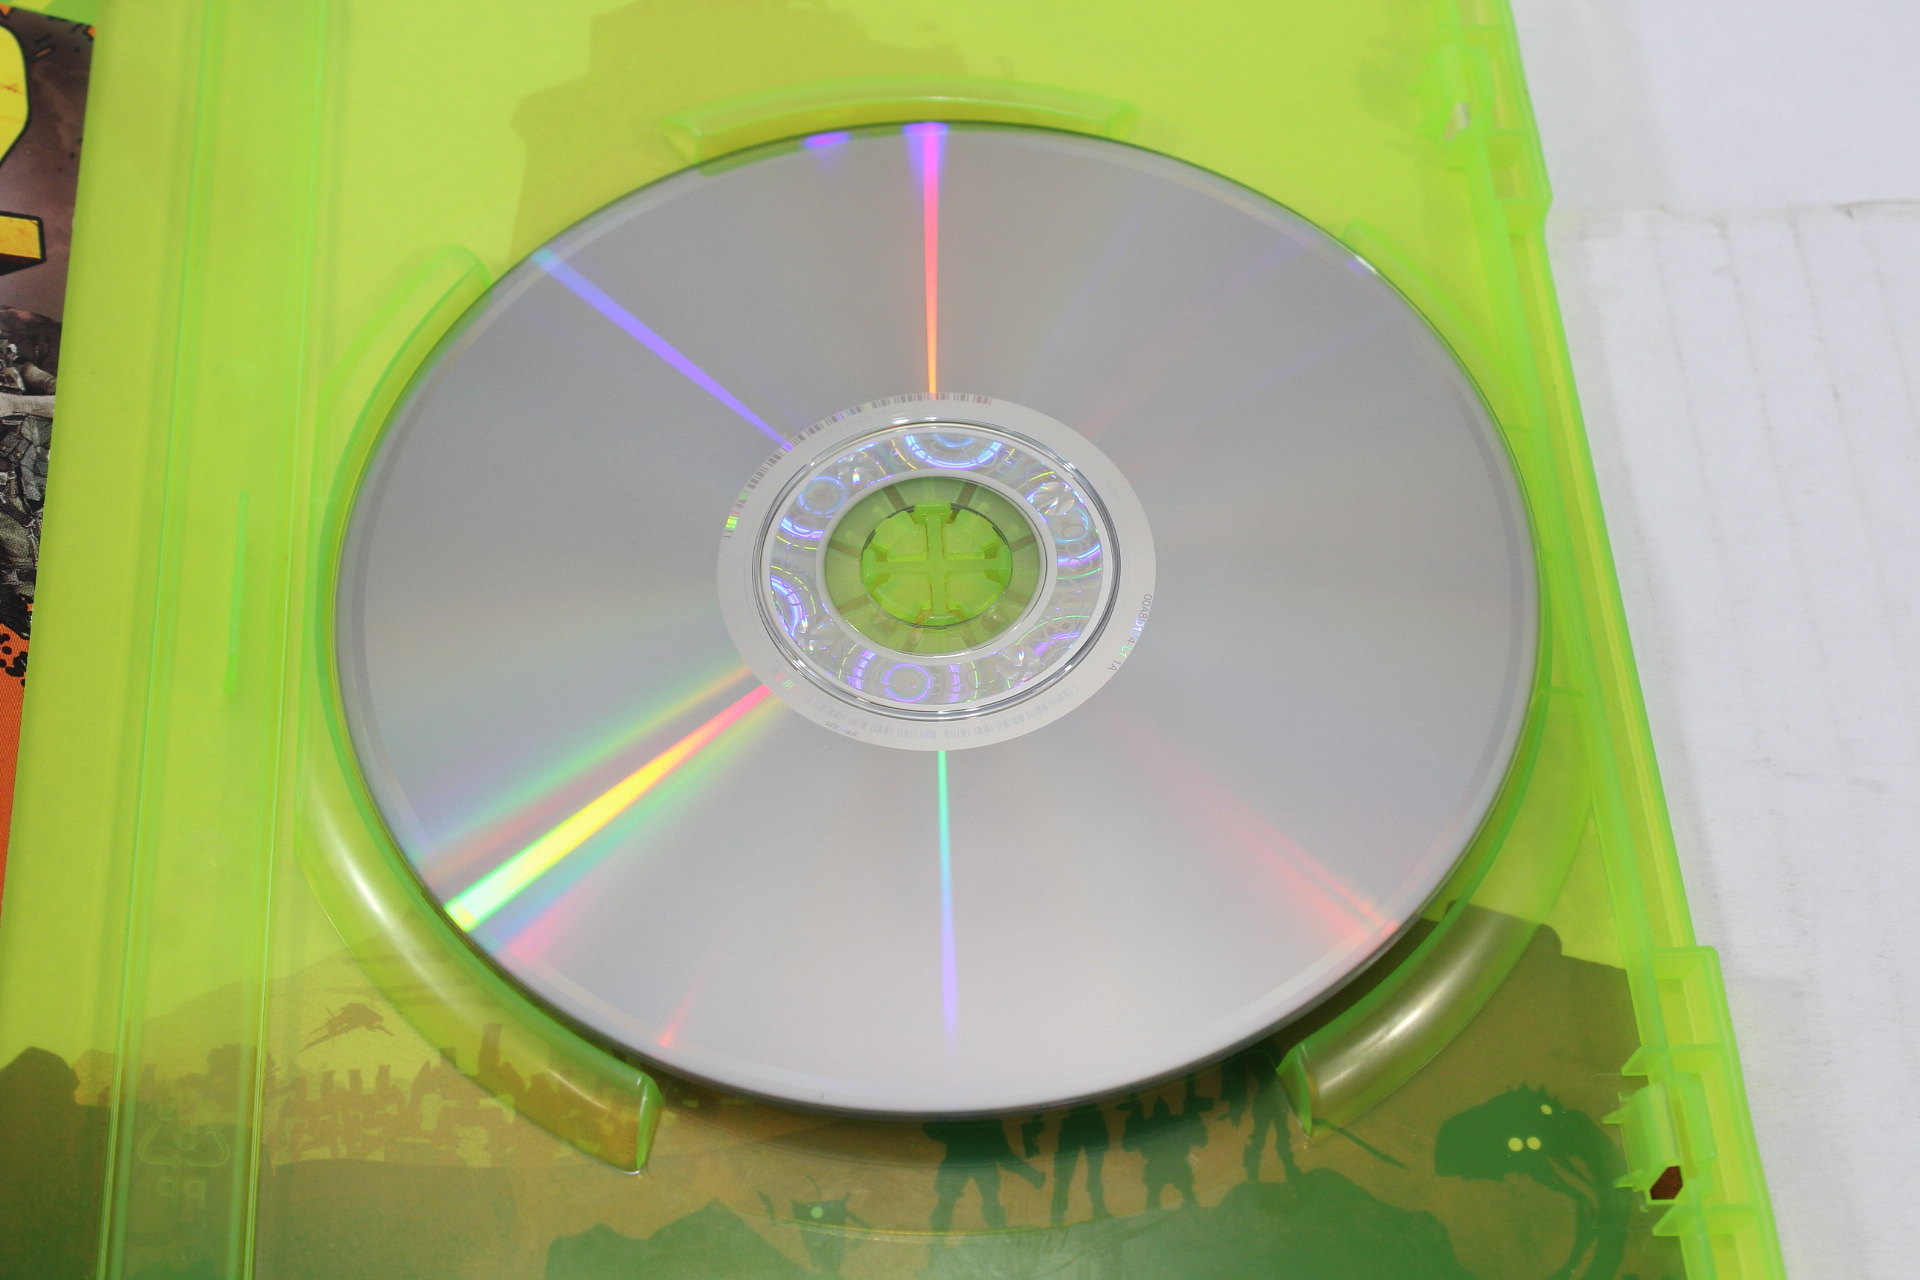 Buy the Borderlands- Xbox 360 Game Disc